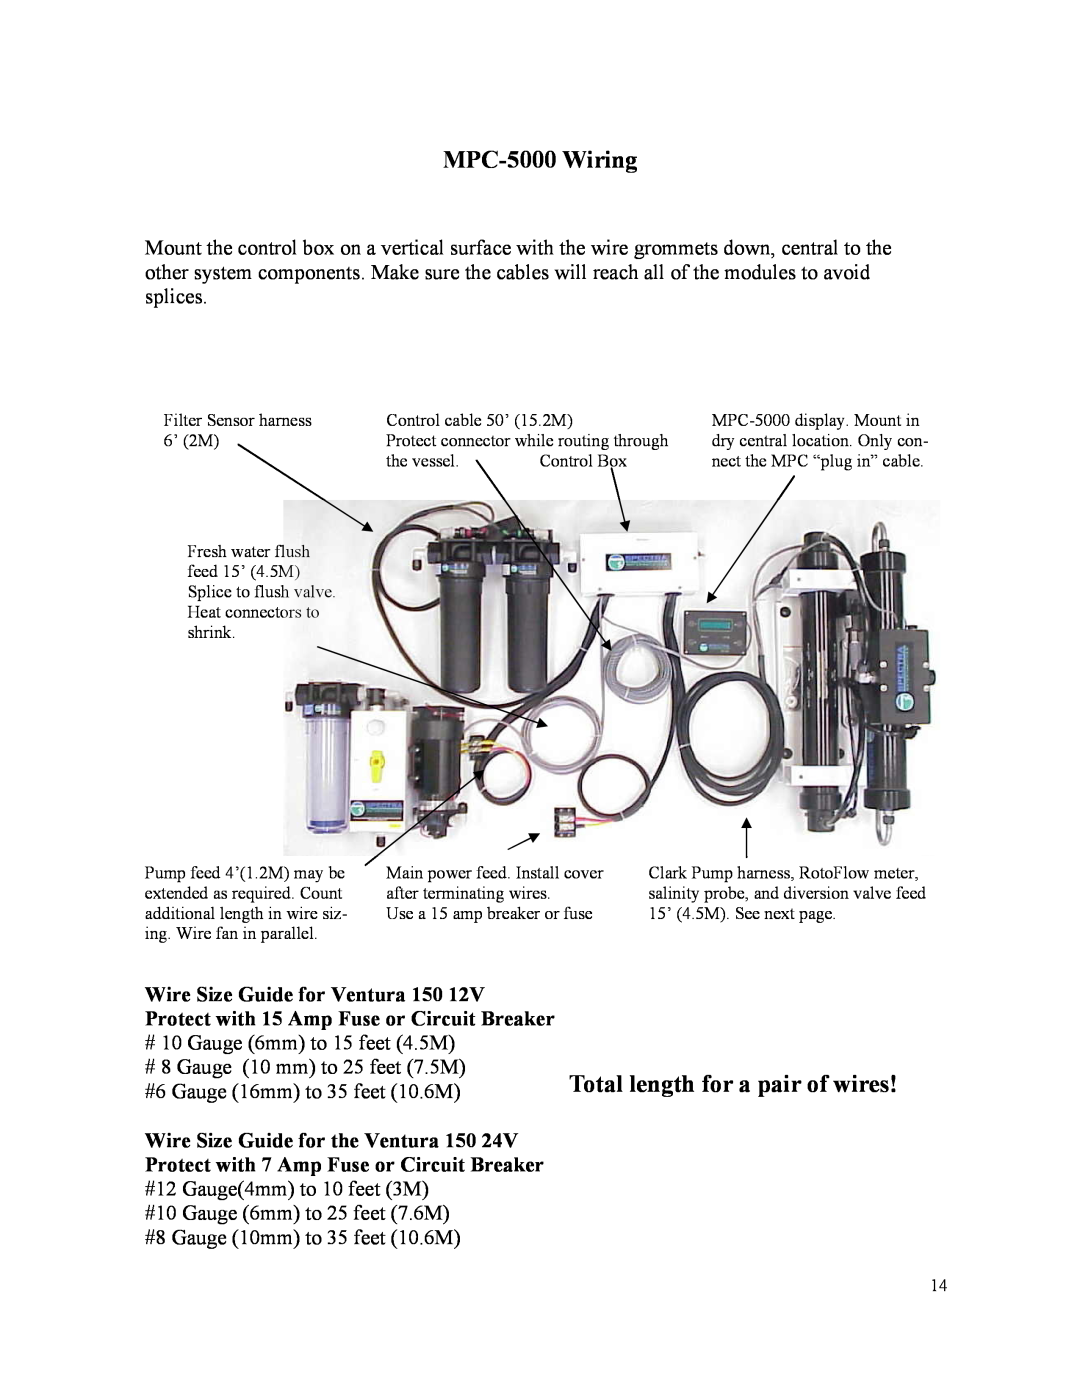 Spectra Watermakers owner manual MPC-5000Wiring, Total length for a pair of wires, Wire Size Guide for Ventura 150 